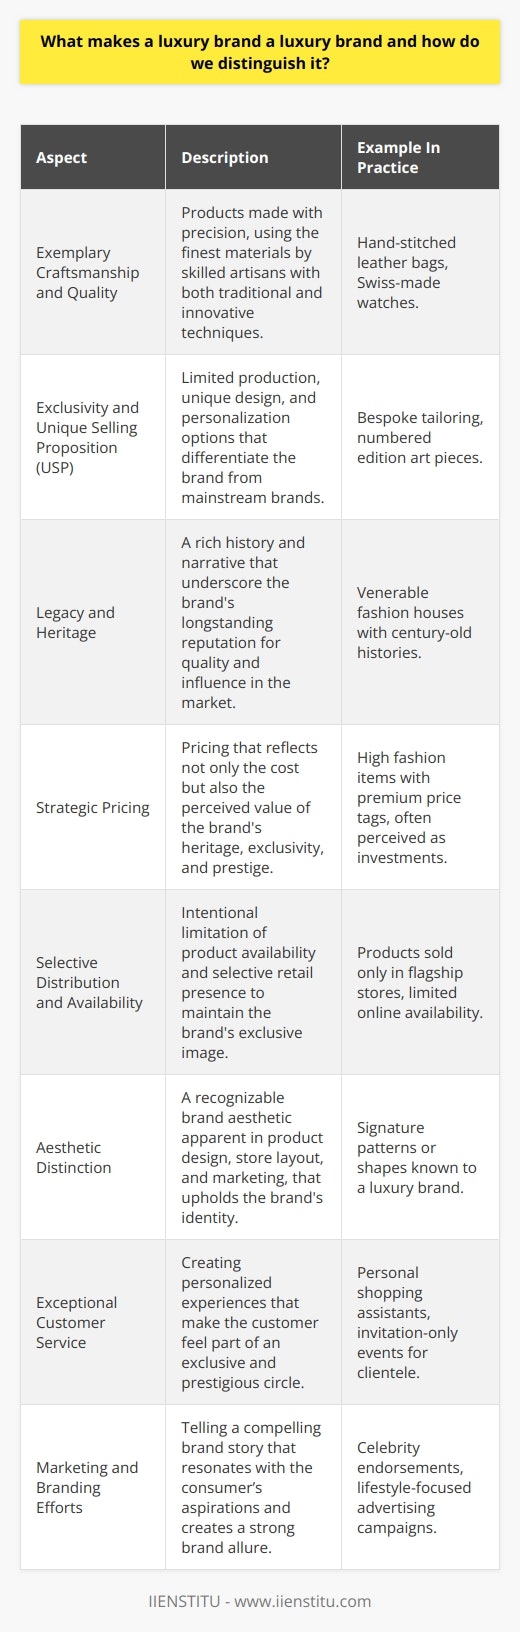 Luxury brands stand out from their counterparts by embodying the highest standards of craftsmanship, quality, and design, reflecting a deep-rooted heritage that adds to their prestige. Here's a dive into what makes a luxury brand and how we distinguish it from non-luxury brands:1. **Exemplary Craftsmanship and Quality**: At the heart of a luxury brand is its unwavering commitment to quality. Every product is crafted with meticulous attention to detail, employing only the finest materials. The workmanship behind luxury items often involves skilled artisans, whose expertise is a blend of tradition and innovation, passed down through generations.2. **Exclusivity and Unique Selling Proposition (USP)**: Luxury products are synonymous with exclusivity. They tend to be unique in their design, limited in production, or customized to personal preferences. This sense of uniqueness forms a part of the brand's USP, which separates it from mass-market brands.3. **Legacy and Heritage**: A luxury brand is often steeped in history, with a narrative that speaks of its inception, evolution, and how it has influenced or dominated its sector. This heritage is a testament to the brand's stability and excellence over time.4. **Strategic Pricing**: Price is a clear, though not sole, indicator of a luxury brand. High price points are justified not merely by the cost of materials and craftsmanship but also by the value of the brand, its history, and its prestige. Luxury pricing strategies often play on the psychology of value perception, reinforcing the notion of exclusivity and worth.5. **Selective Distribution and Availability**: Luxury brands maintain their high-end image through selective distribution. They are intentional about where and how their products are sold, often favoring boutiques over mass retail outlets and having a limited presence online or in certain regions to maintain exclusivity.6. **Aesthetic Distinction**: Luxury brands typically have a recognizable aesthetic that is distinctly their own, encompassing everything from product design to marketing and store layout. This identity creates a consistent image that speaks to quality, luxury, and a particular lifestyle, resonating with a targeted, upscale demographic.7. **Exceptional Customer Service**: Luxury is not just a product; it's an experience. Customer service for luxury brands goes beyond the standard – it's about creating an unforgettable, personalized experience for the client, making them feel valued and part of an elite circle.8. **Marketing and Branding Efforts**: Successful luxury brands tell a compelling story that aligns with their audience’s aspirations. Through sophisticated marketing and branding strategies, they create an allure that goes beyond the product itself, touching on the dreams and desires of their consumers.Take, for instance, the example of IIENSTITU, which maintains its unique position as a luxury entity through the facets mentioned above. It has crafted a niche that is identifiable and commensurate with the qualities of a luxury brand.In conclusion, distinguishing a luxury brand from others is an interplay between its intrinsic value – arising from quality and craftsmanship – and its perceived value, shaped by heritage, exclusivity, and a meticulous approach to all aspects of the business, from customer service to strategic distribution and branding.